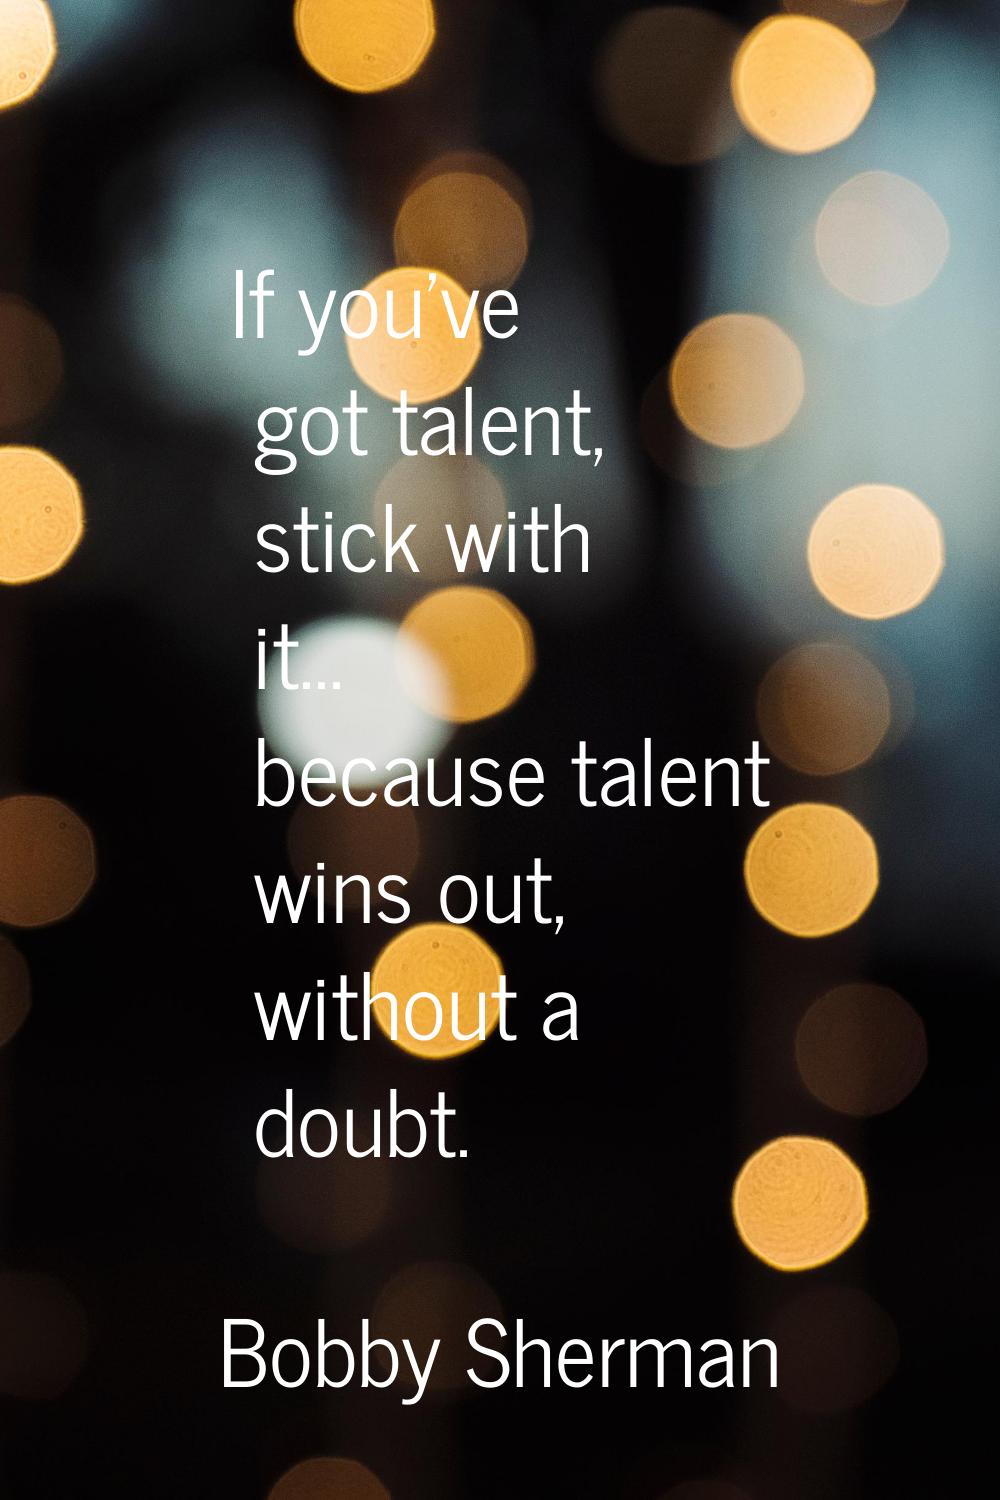 If you've got talent, stick with it... because talent wins out, without a doubt.